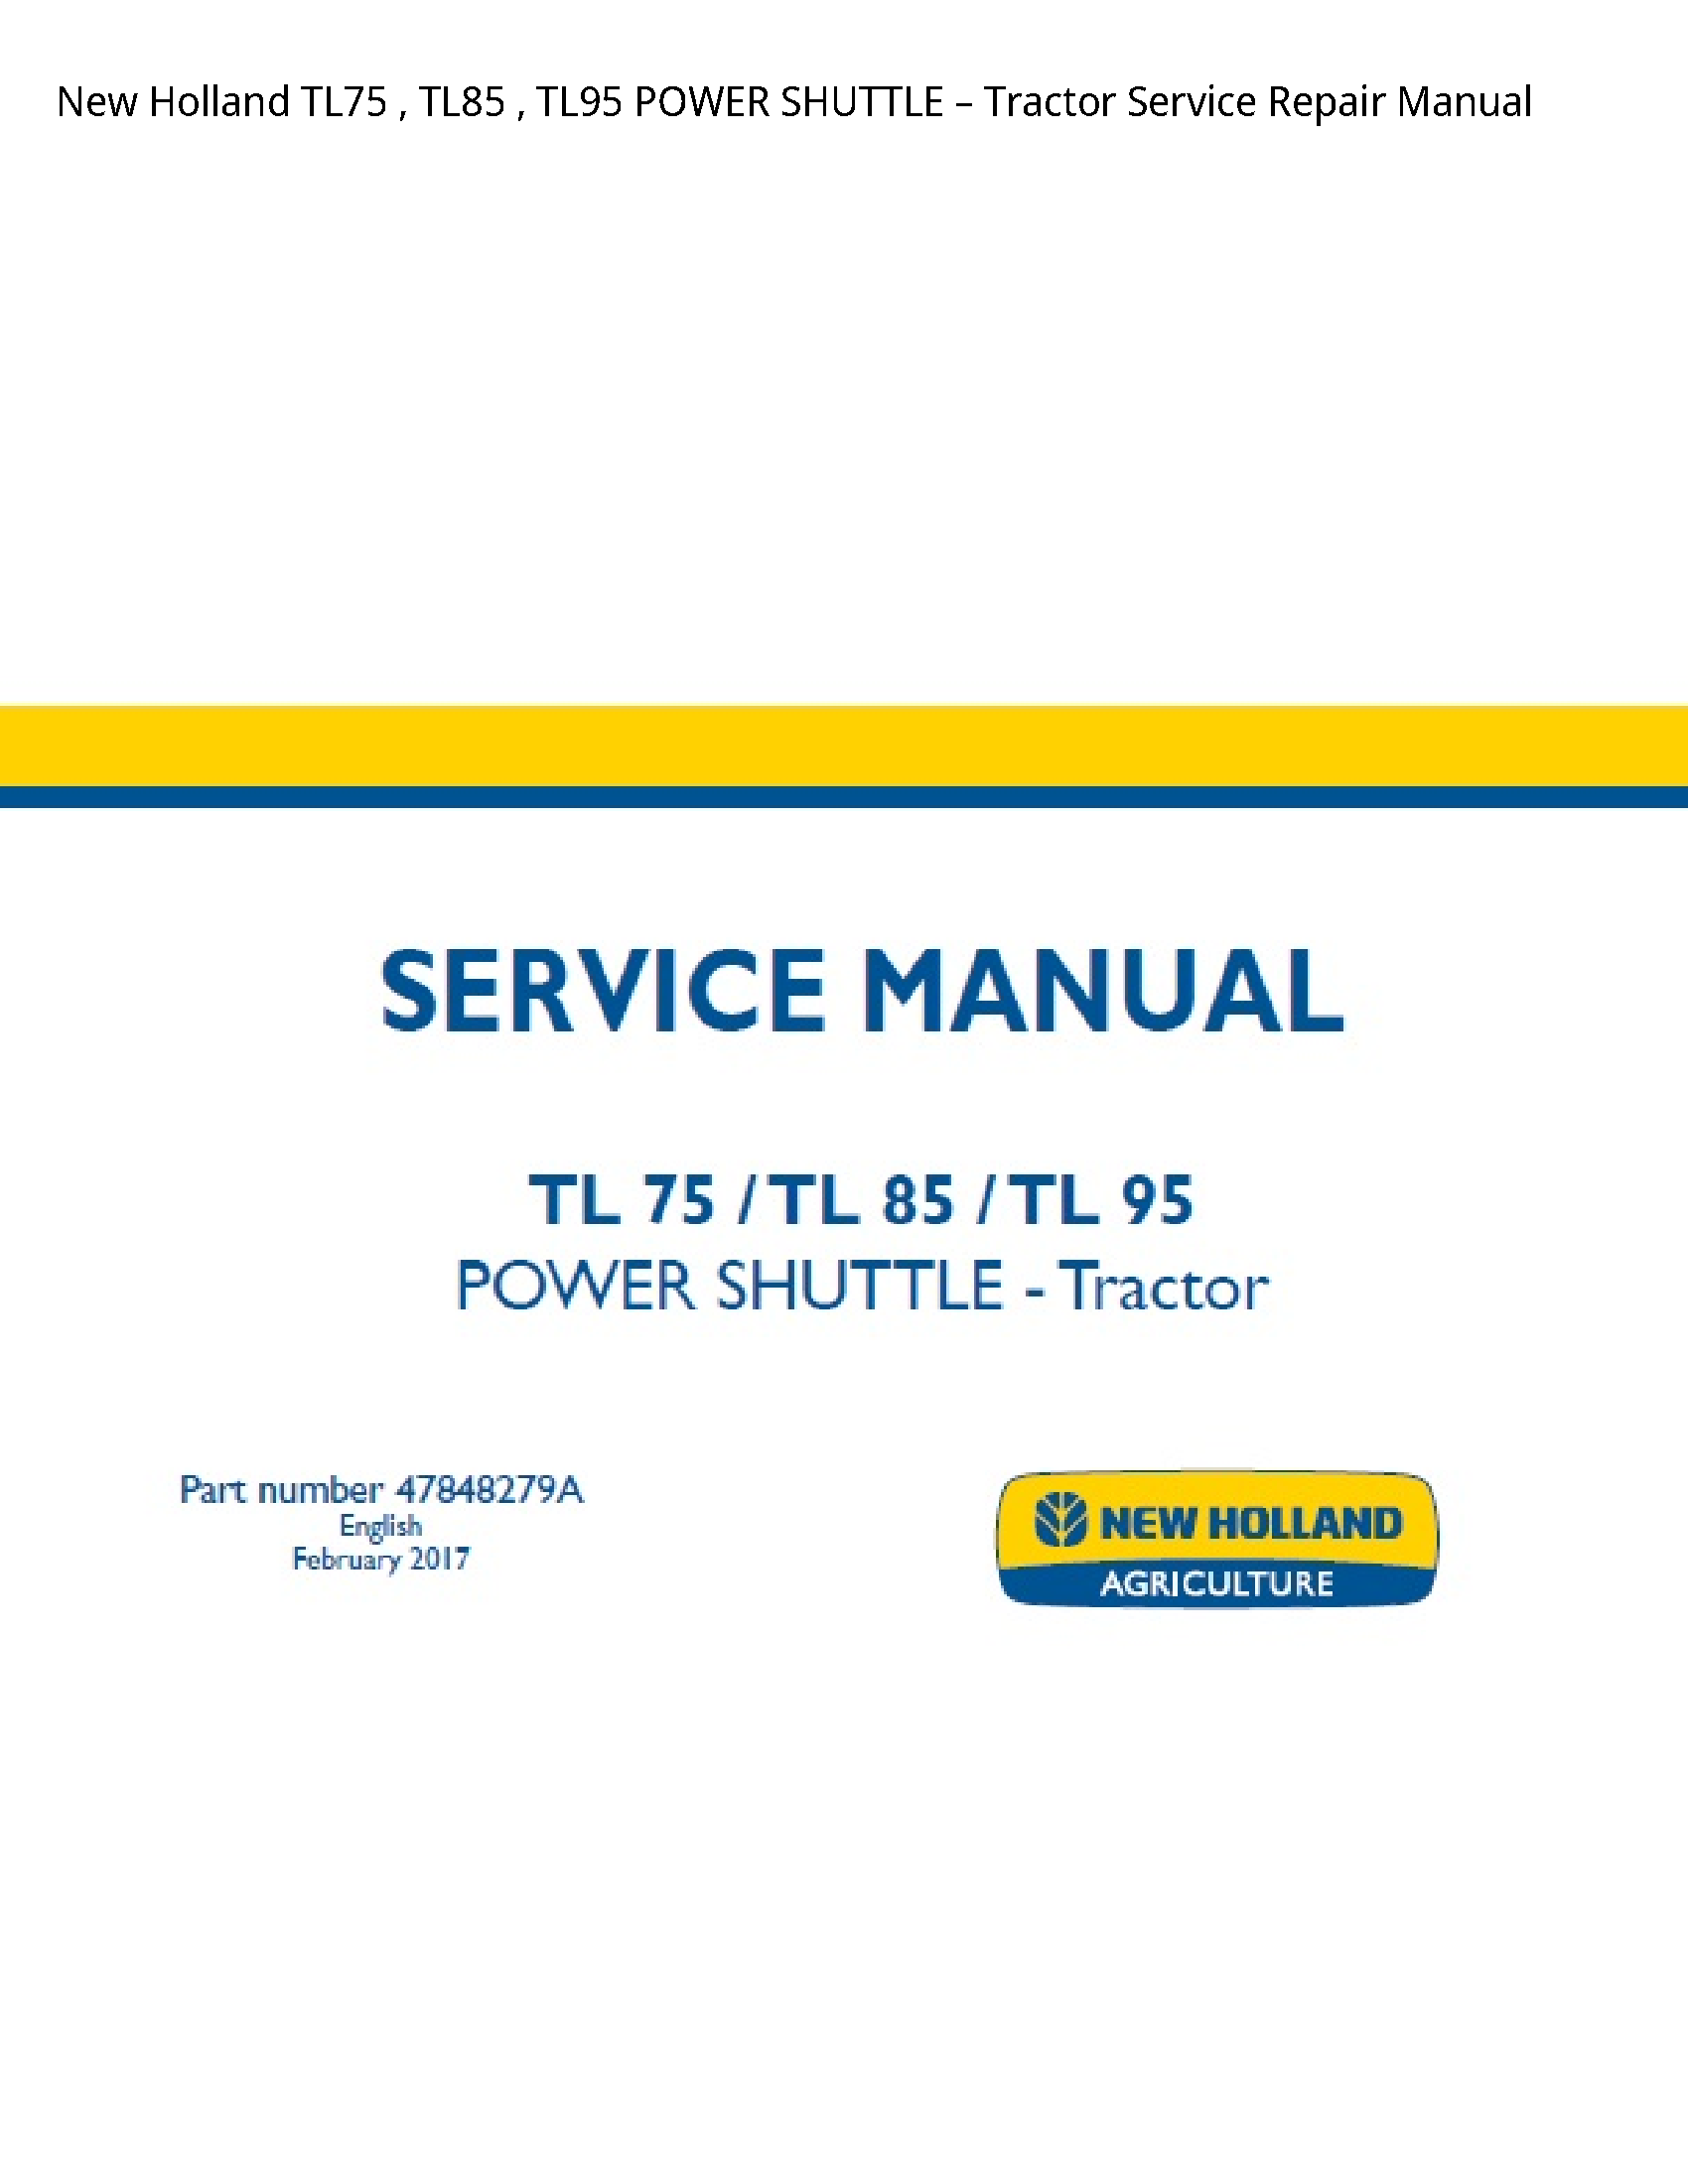 New Holland TL75 POWER SHUTTLE Tractor manual